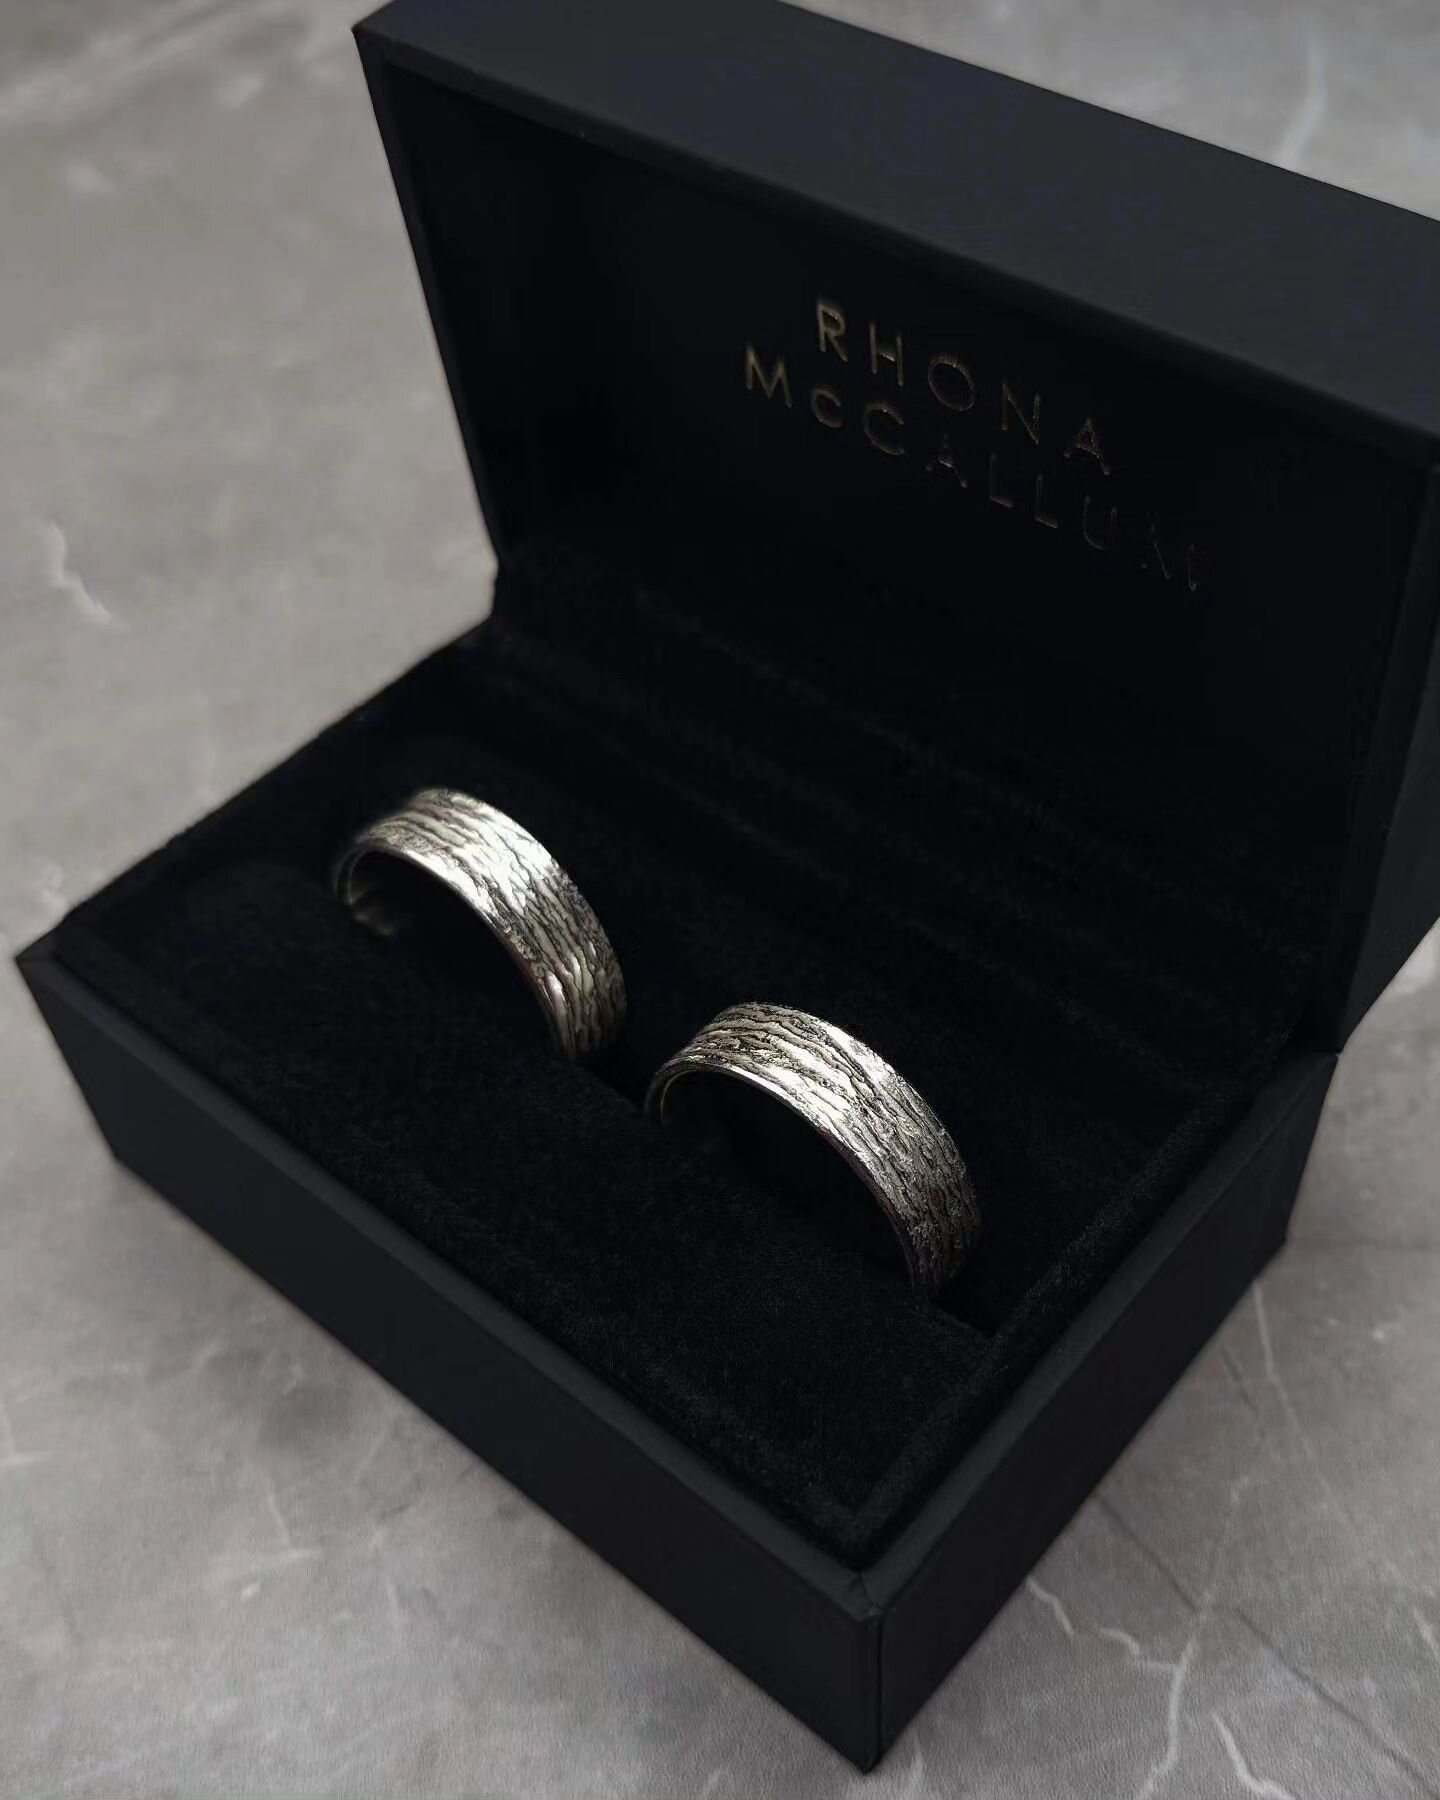 Loooved making this chunky pair of 6mm 9ct white gold Machrie wedding rings. Congratulations C&amp;A and thank you for asking me to make these rings for you!